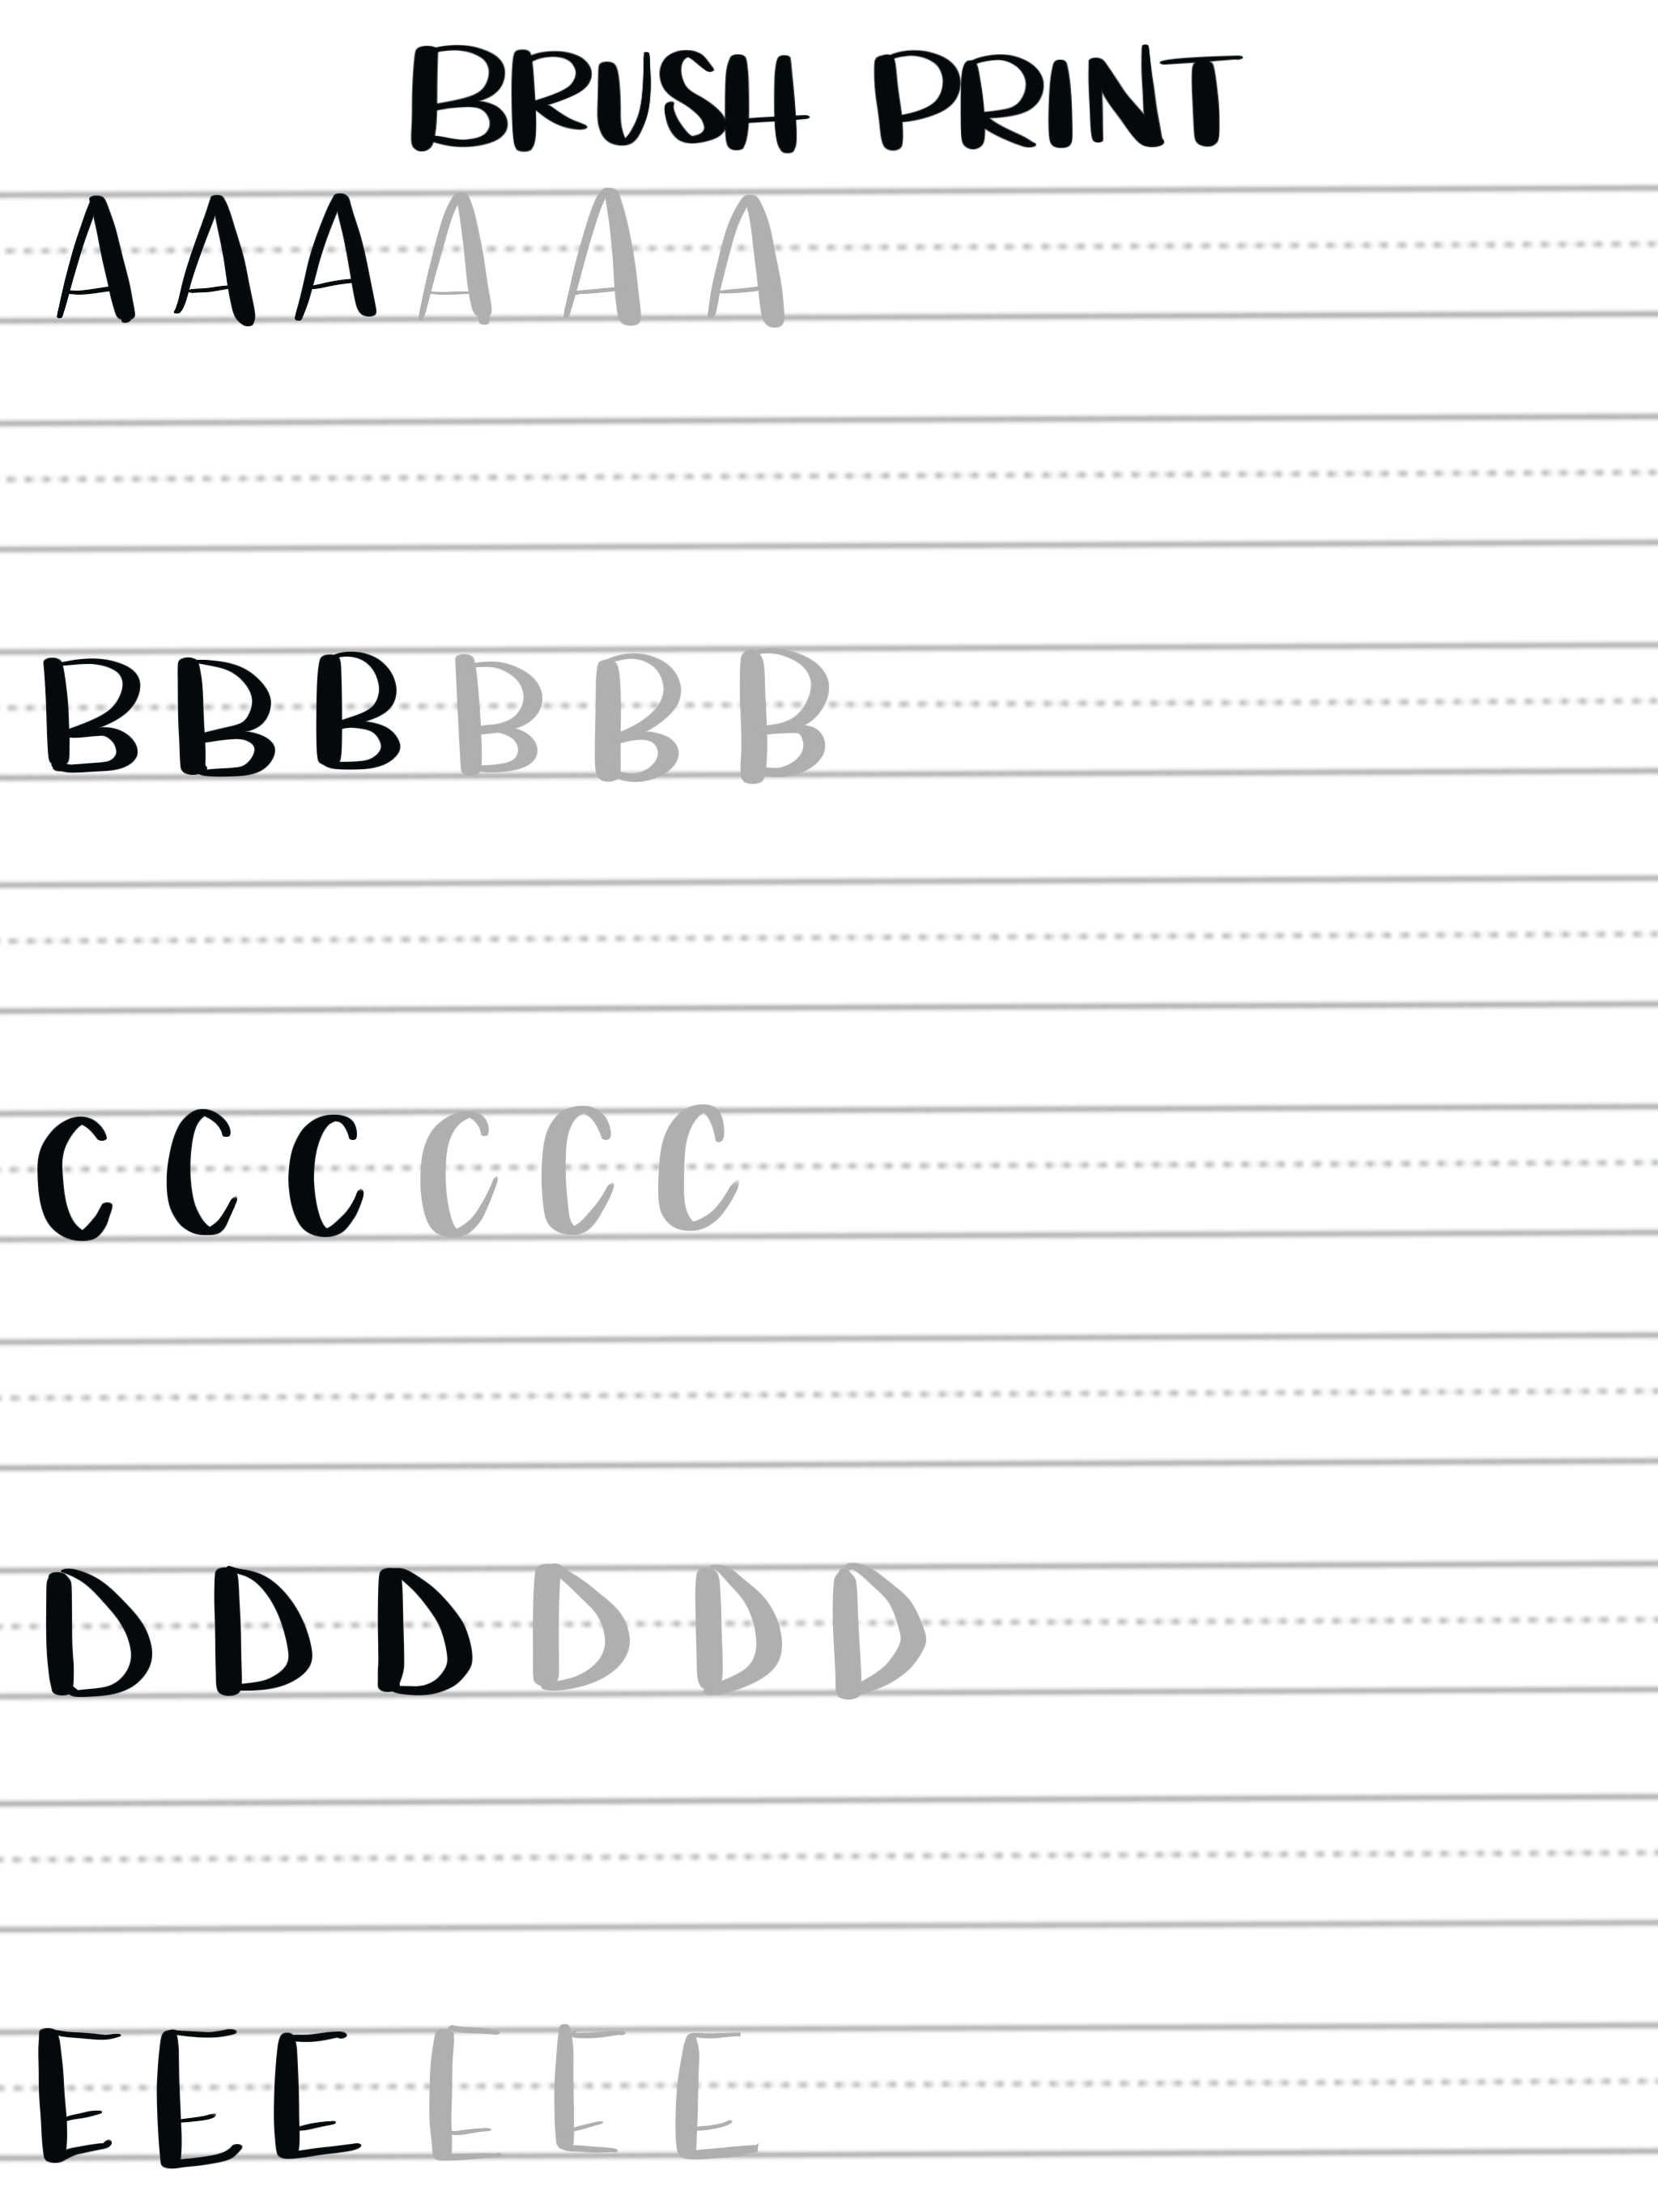 Free Brush Lettering Practice Pages Uppercase Print Alphabet Amy Latta Creations Brush Lettering Practice Brush Lettering Hand Lettering Worksheet